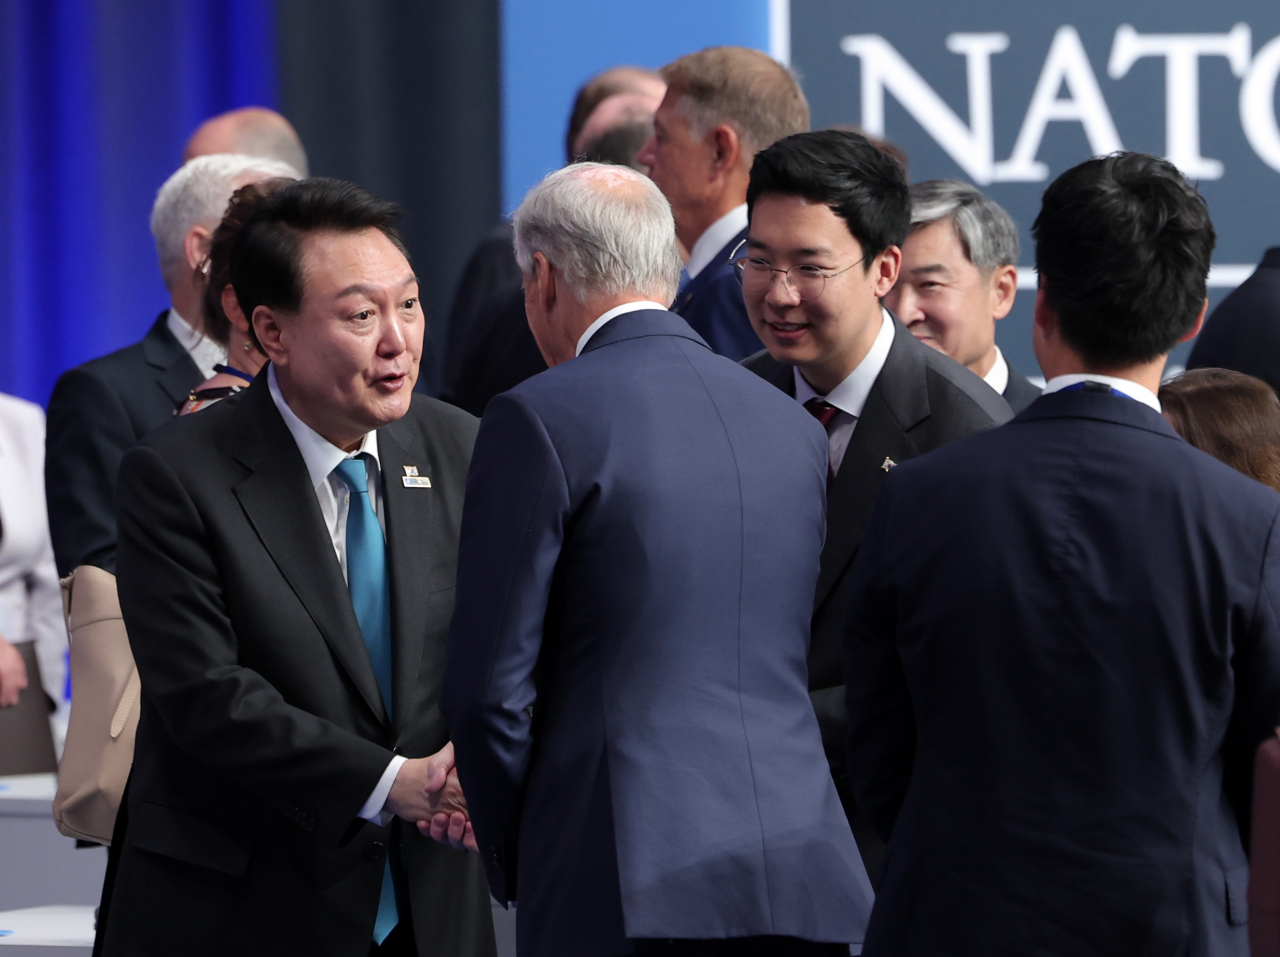 South Korean President Yoon Suk Yeol (L, front) greets other participants during a summit of the North Atlantic Treaty Organization (NATO) and the Asia-Pacific Partnership, or AP4, a group of NATO's four key Asia-Pacific partner countries -- South Korea, Japan, Australia and New Zealand -- in Vilnius, Lithuania, on Wednesday. (Pool photo -Yonhap)